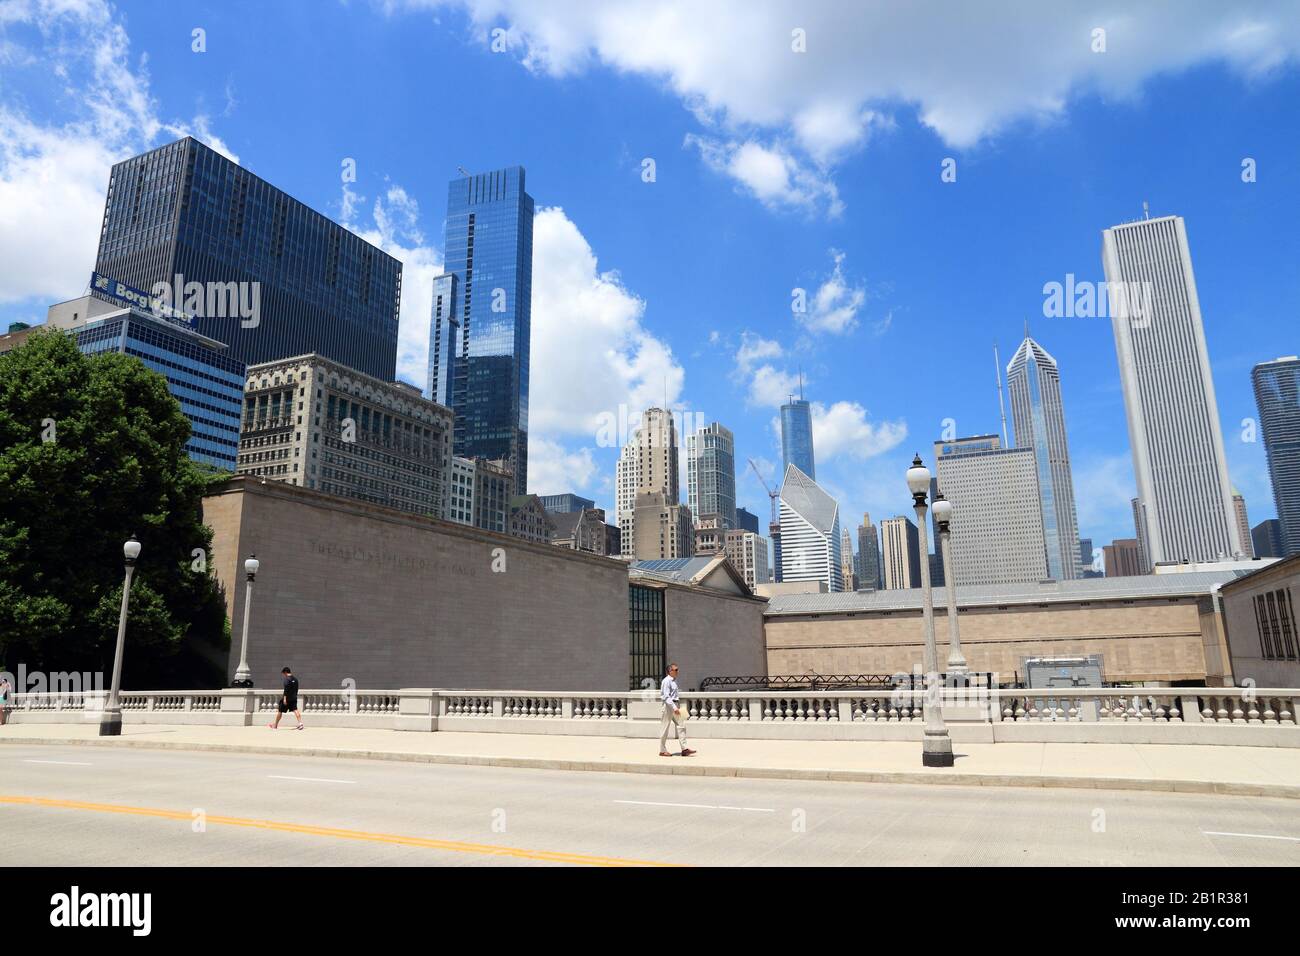 CHICAGO, USA - JUNE 27, 2013: People visit Chicago Loop. Chicago is the 3rd most populous US city with 2.7 million residents (8.7 million in its urban Stock Photo